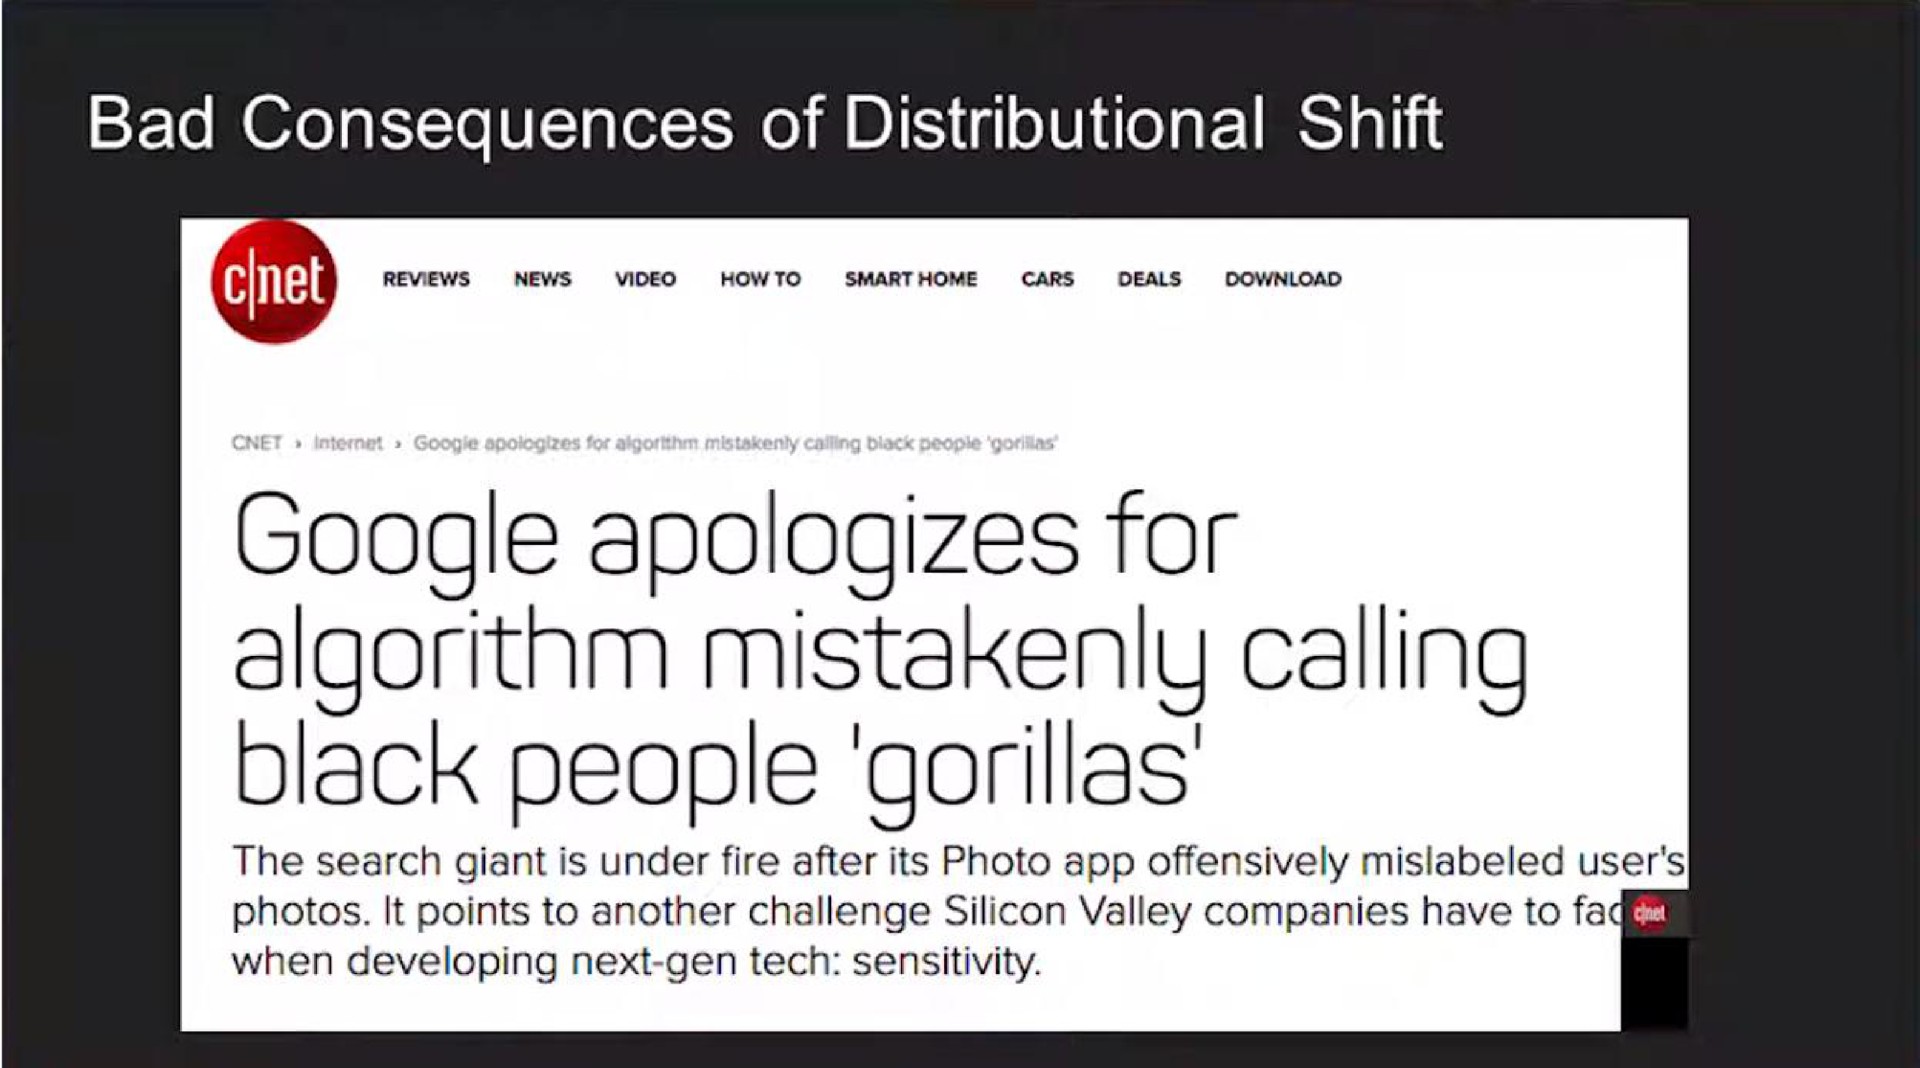 bad consequences of distributional shift apologizes for algorithm mistakenly calling black people gorillas | OpenAI